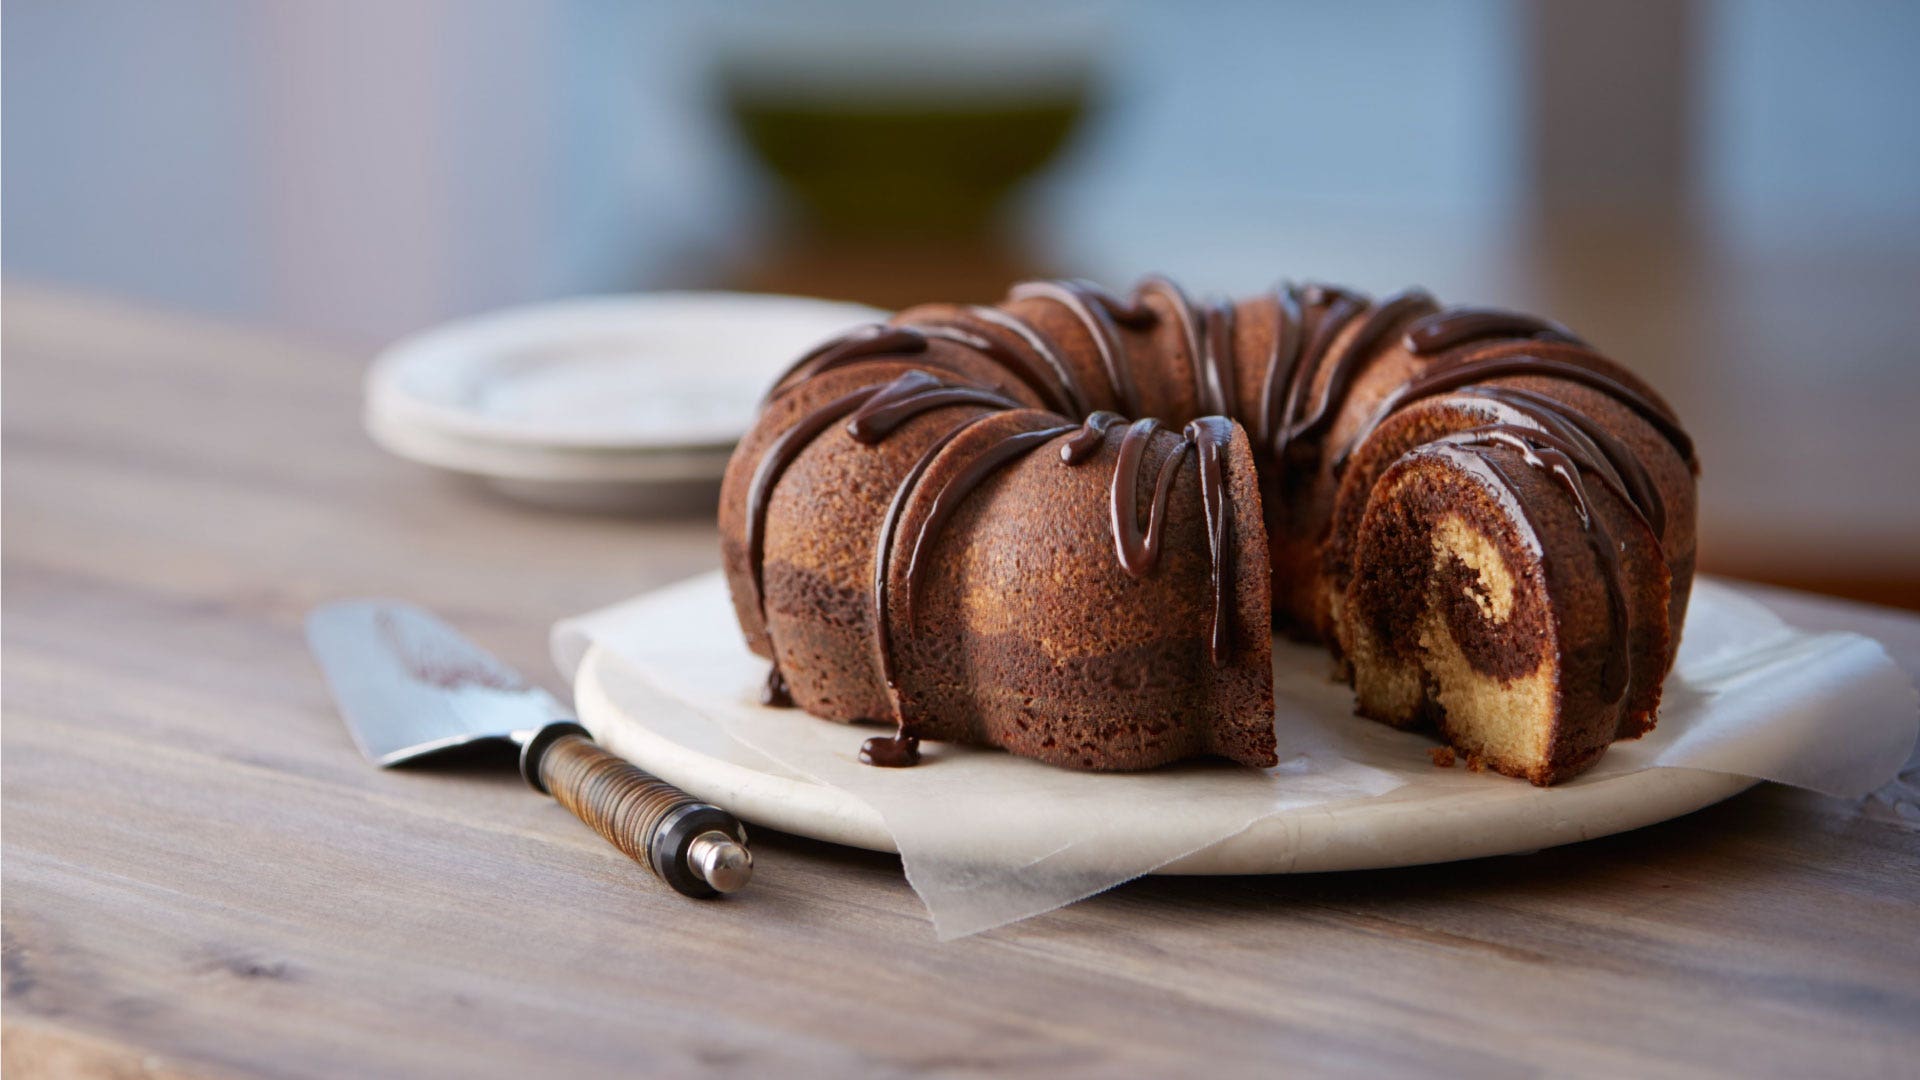 Holiday Swirl Loaf Cake Recipe - Tablespoon.com